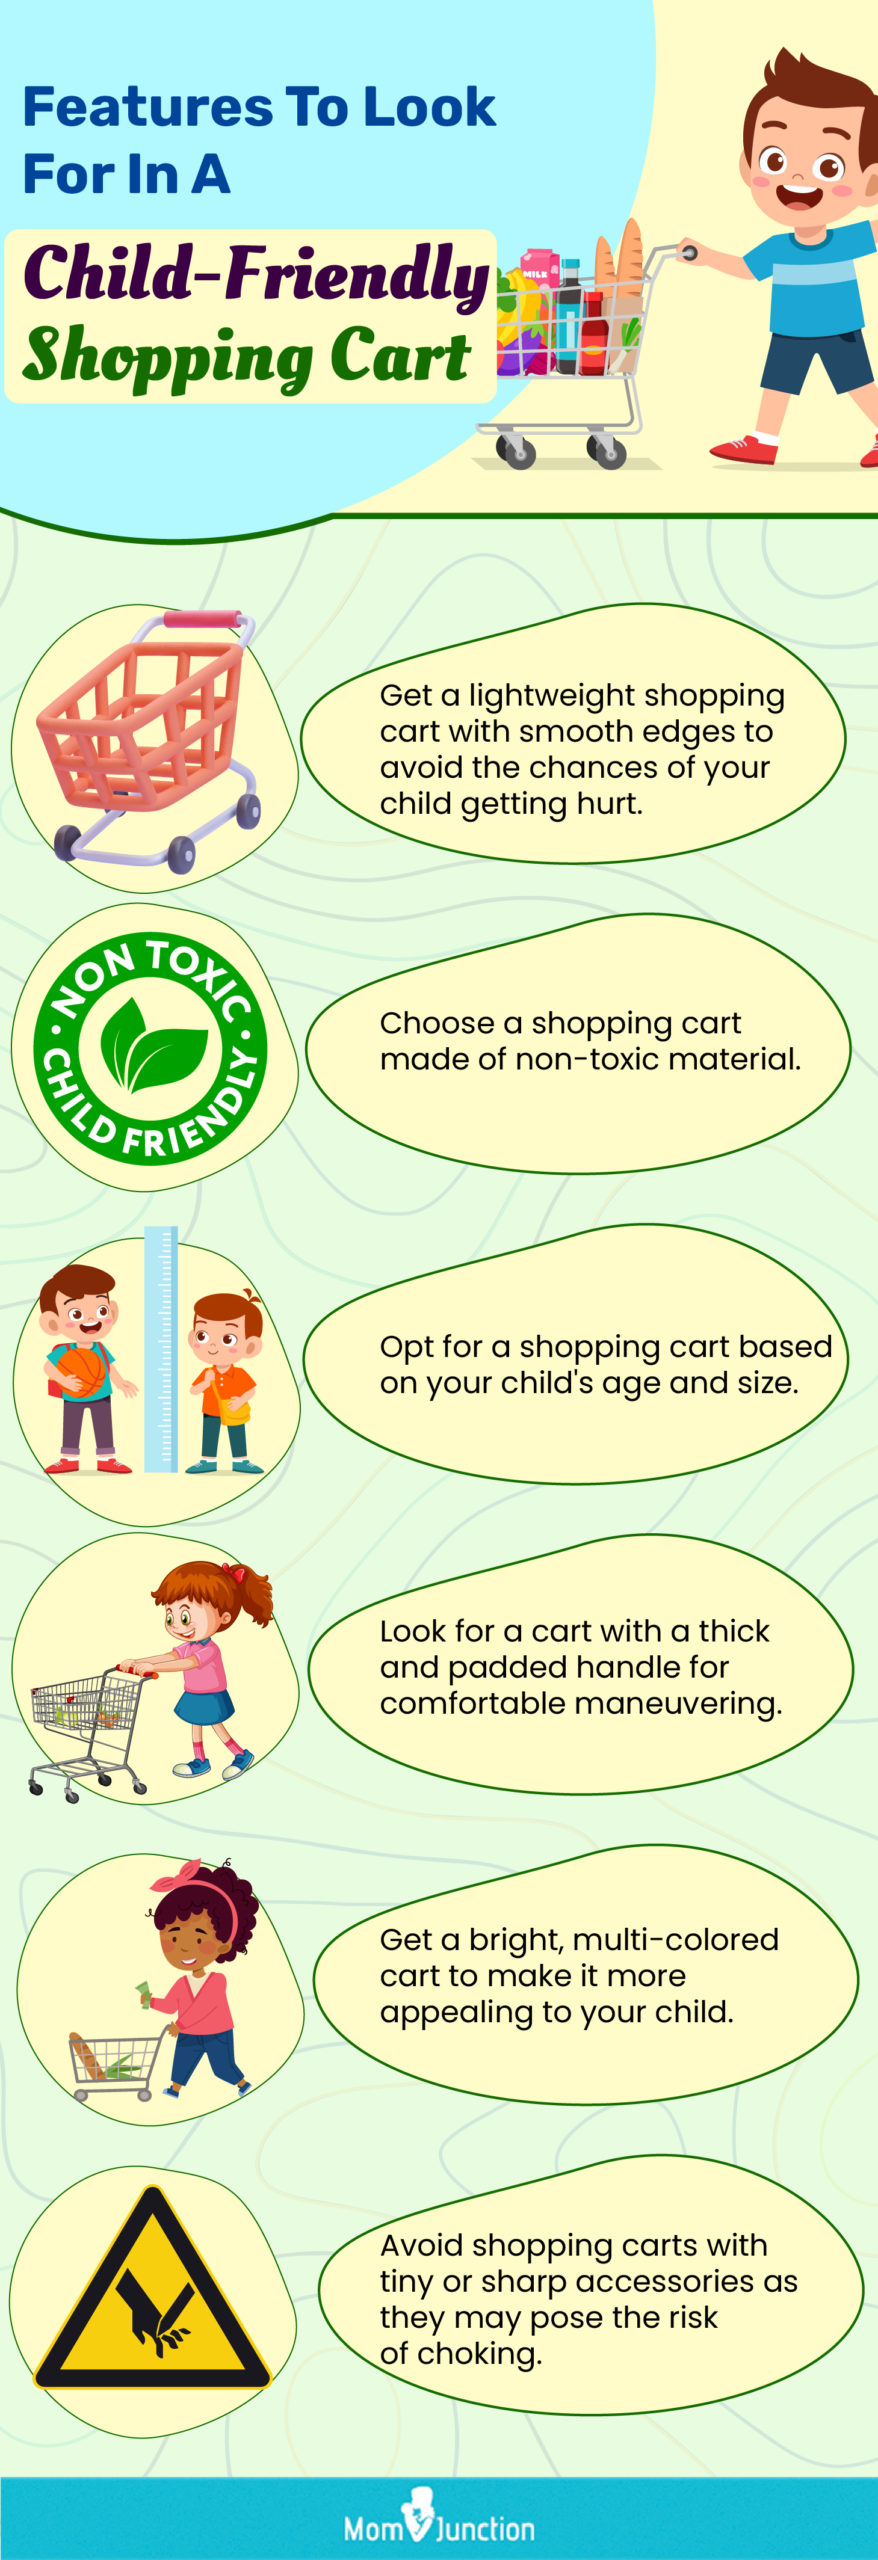 Features To Look For In A Child-Friendly Shopping Cart